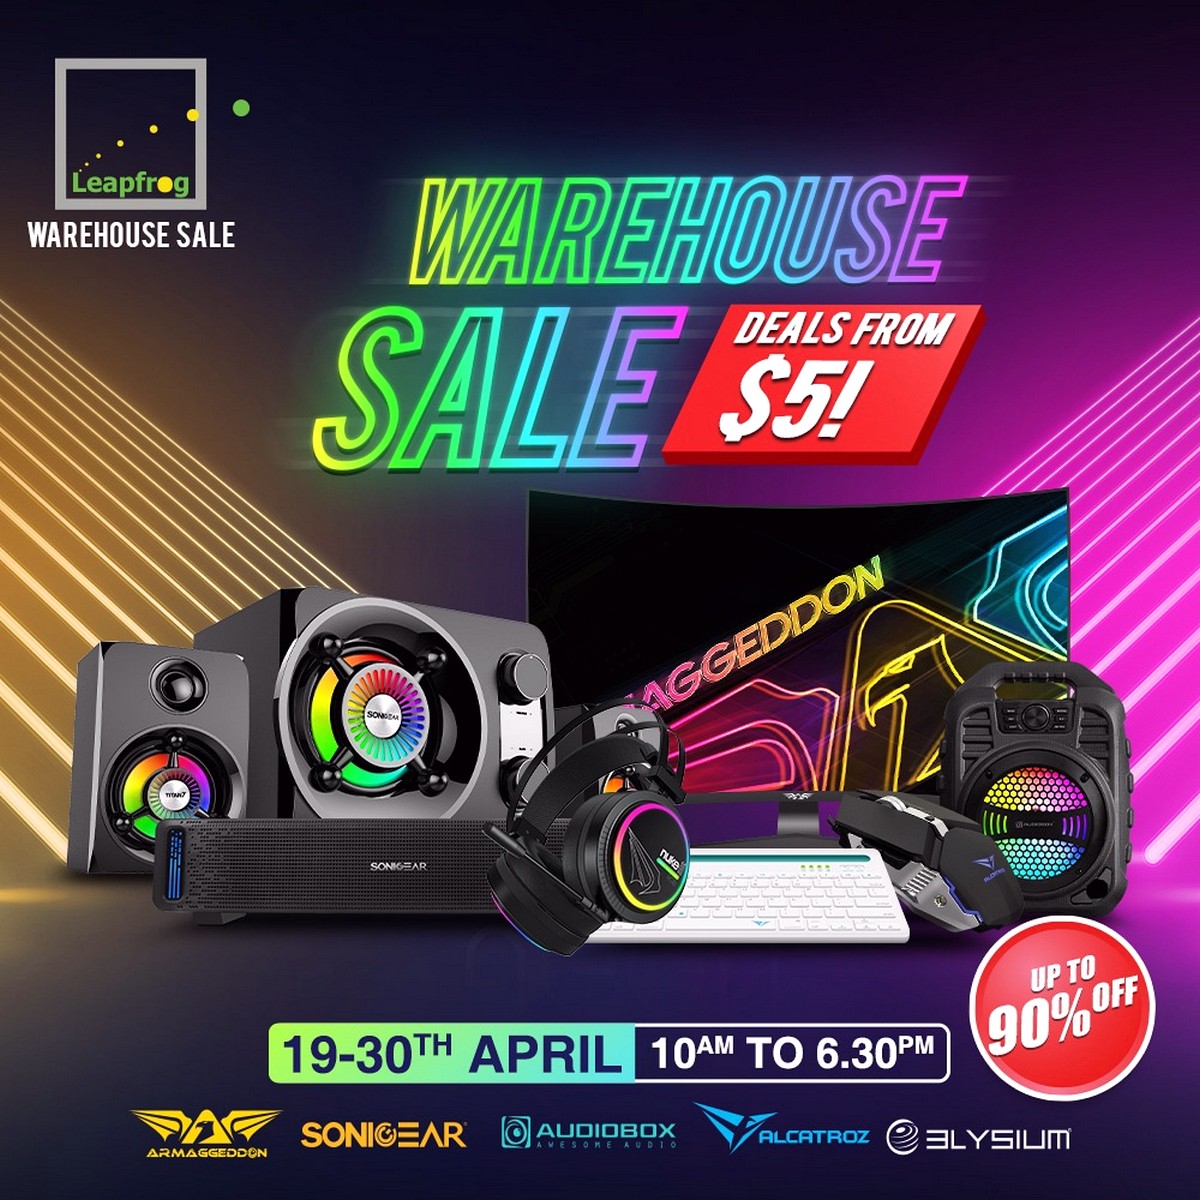 Leapfrog-Warehouse-Sale-2021-Singapore-Clearance-Armaggeddon-SonicGear-Audiobox-Alcatraoz-Elysium 19-30 Apr 2021: Armaggeddon, SonicGear, Audiobox, Alcatroz, Elysium Warehouse Sale Up to 90% OFF at Kallang Sector